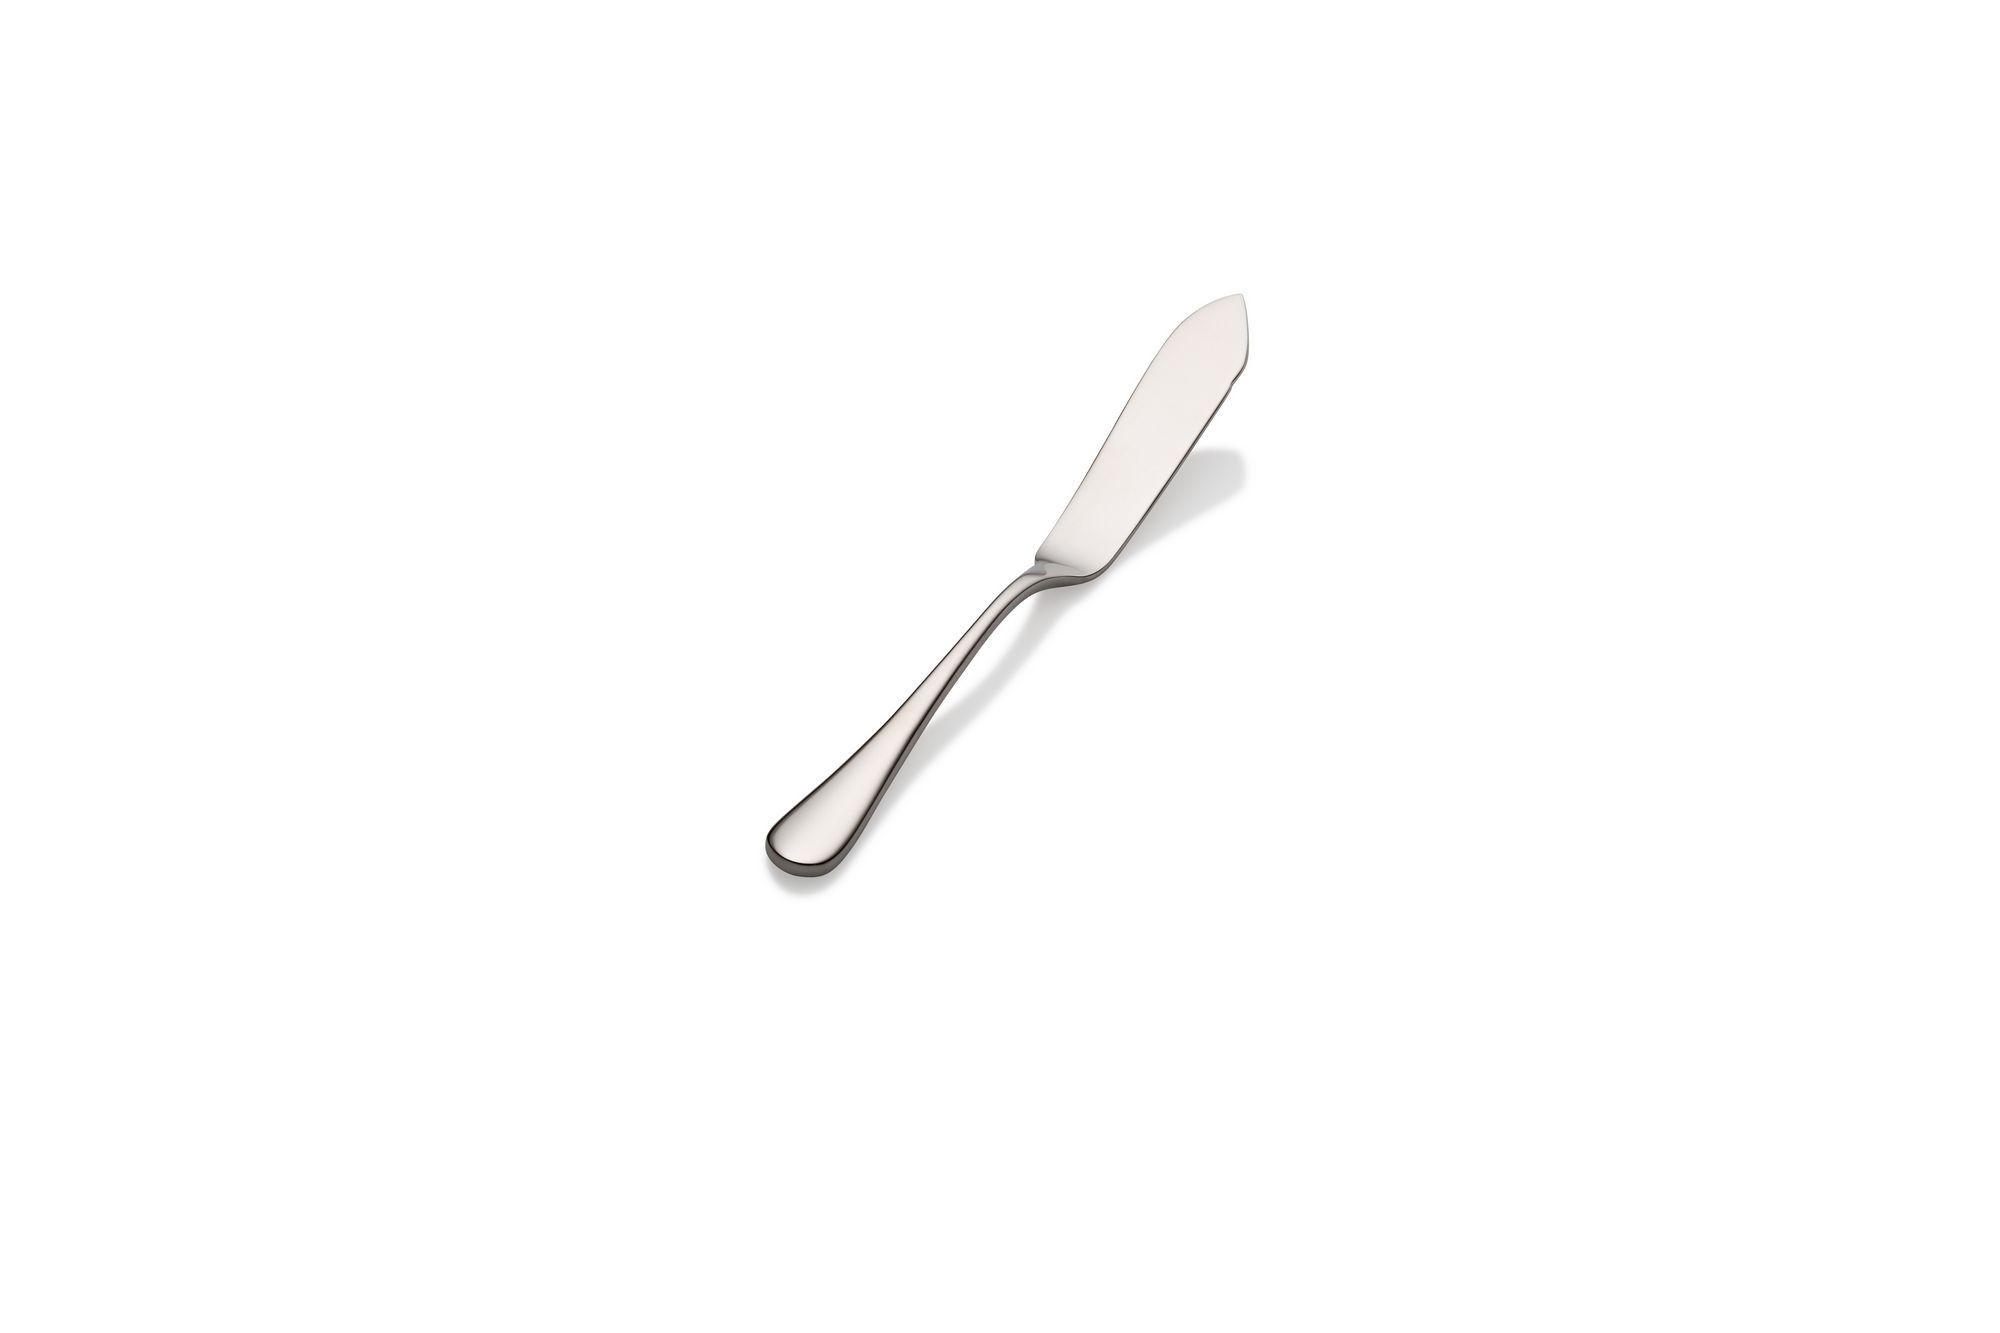 Bon Chef S4010 Como 18/8 Stainless Steel Butter Knife